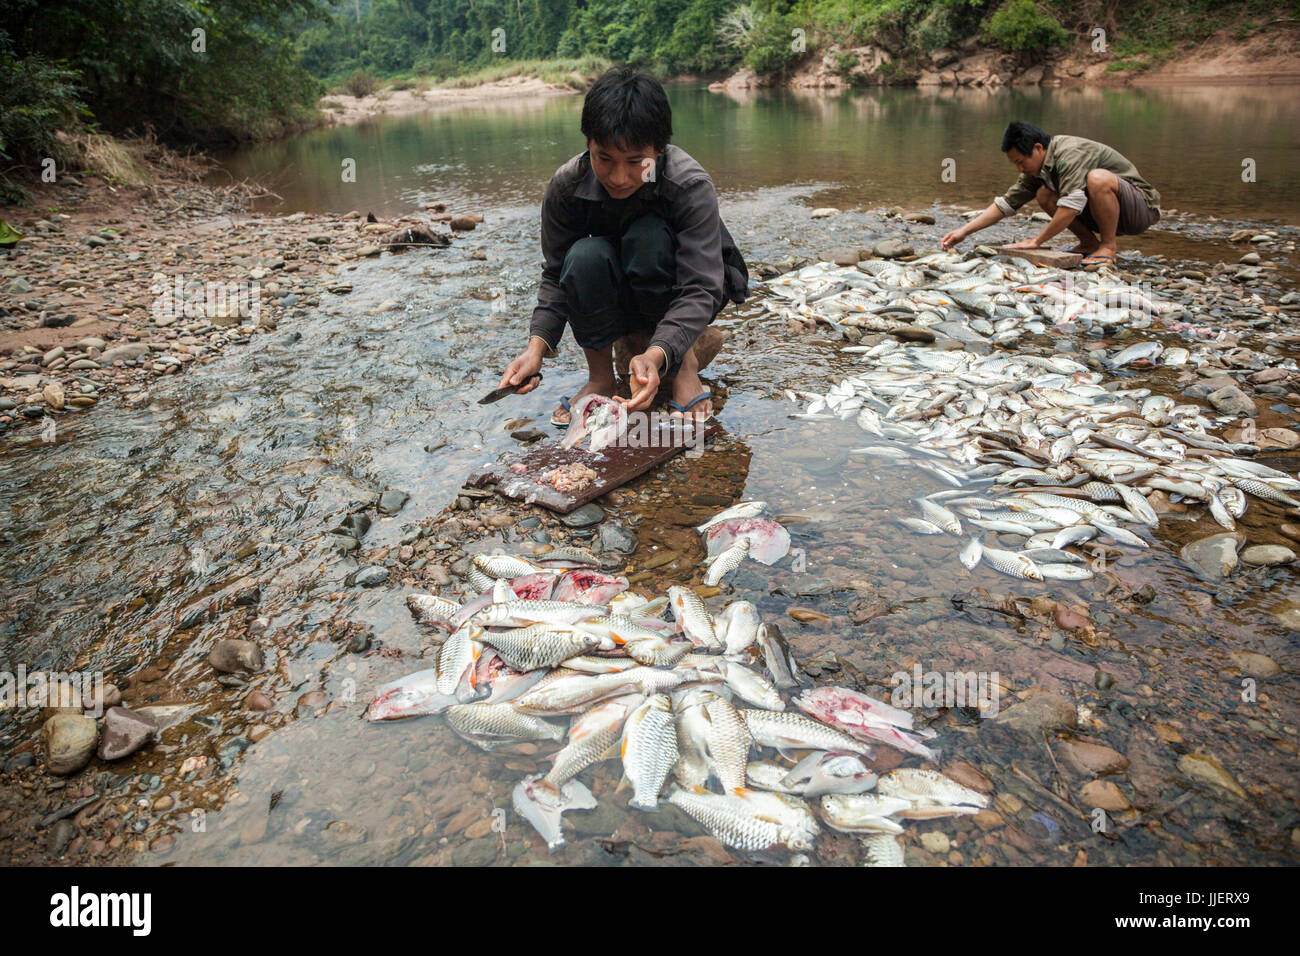 Men gut fish they have caught at their camp on the Nam Ou River in Phou Den Din National Protected Area, Laos. The area is frequented by hunters and fishermen who camp and poach wild game within park boundaries despite (or perhaps without knowledge) that this is technically illegal. Stock Photo